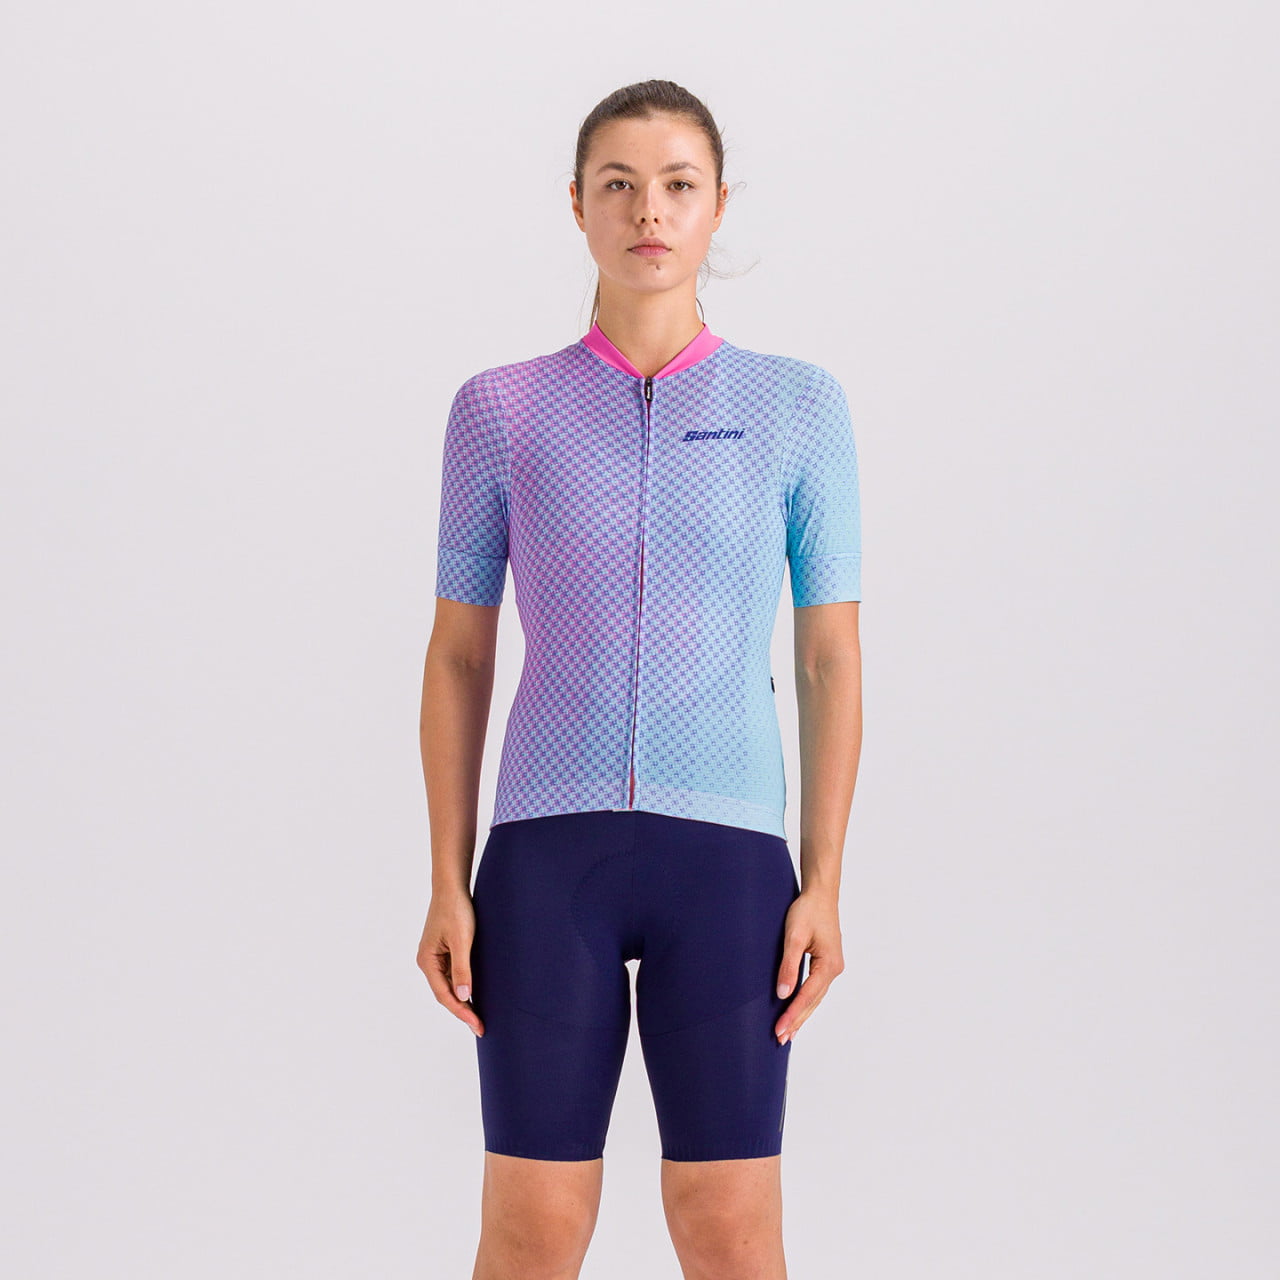 Women's Short Sleeve Jersey Paws Forma